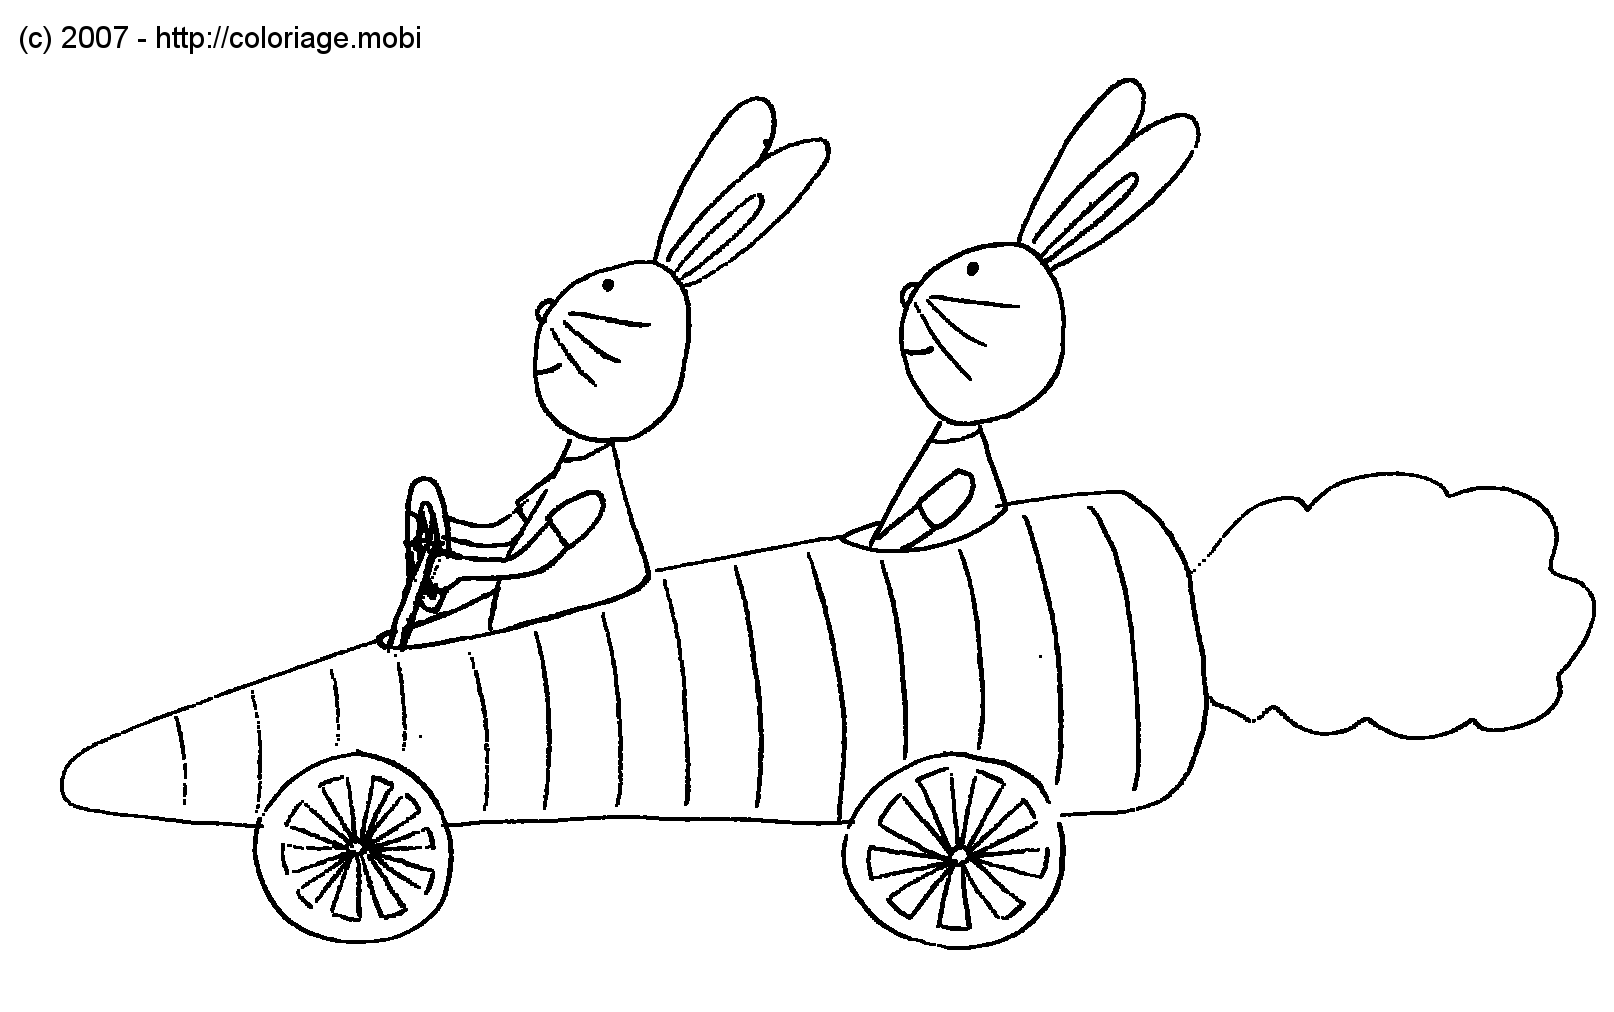 http://coloriage.mobi/images/voiture_carotte.gif